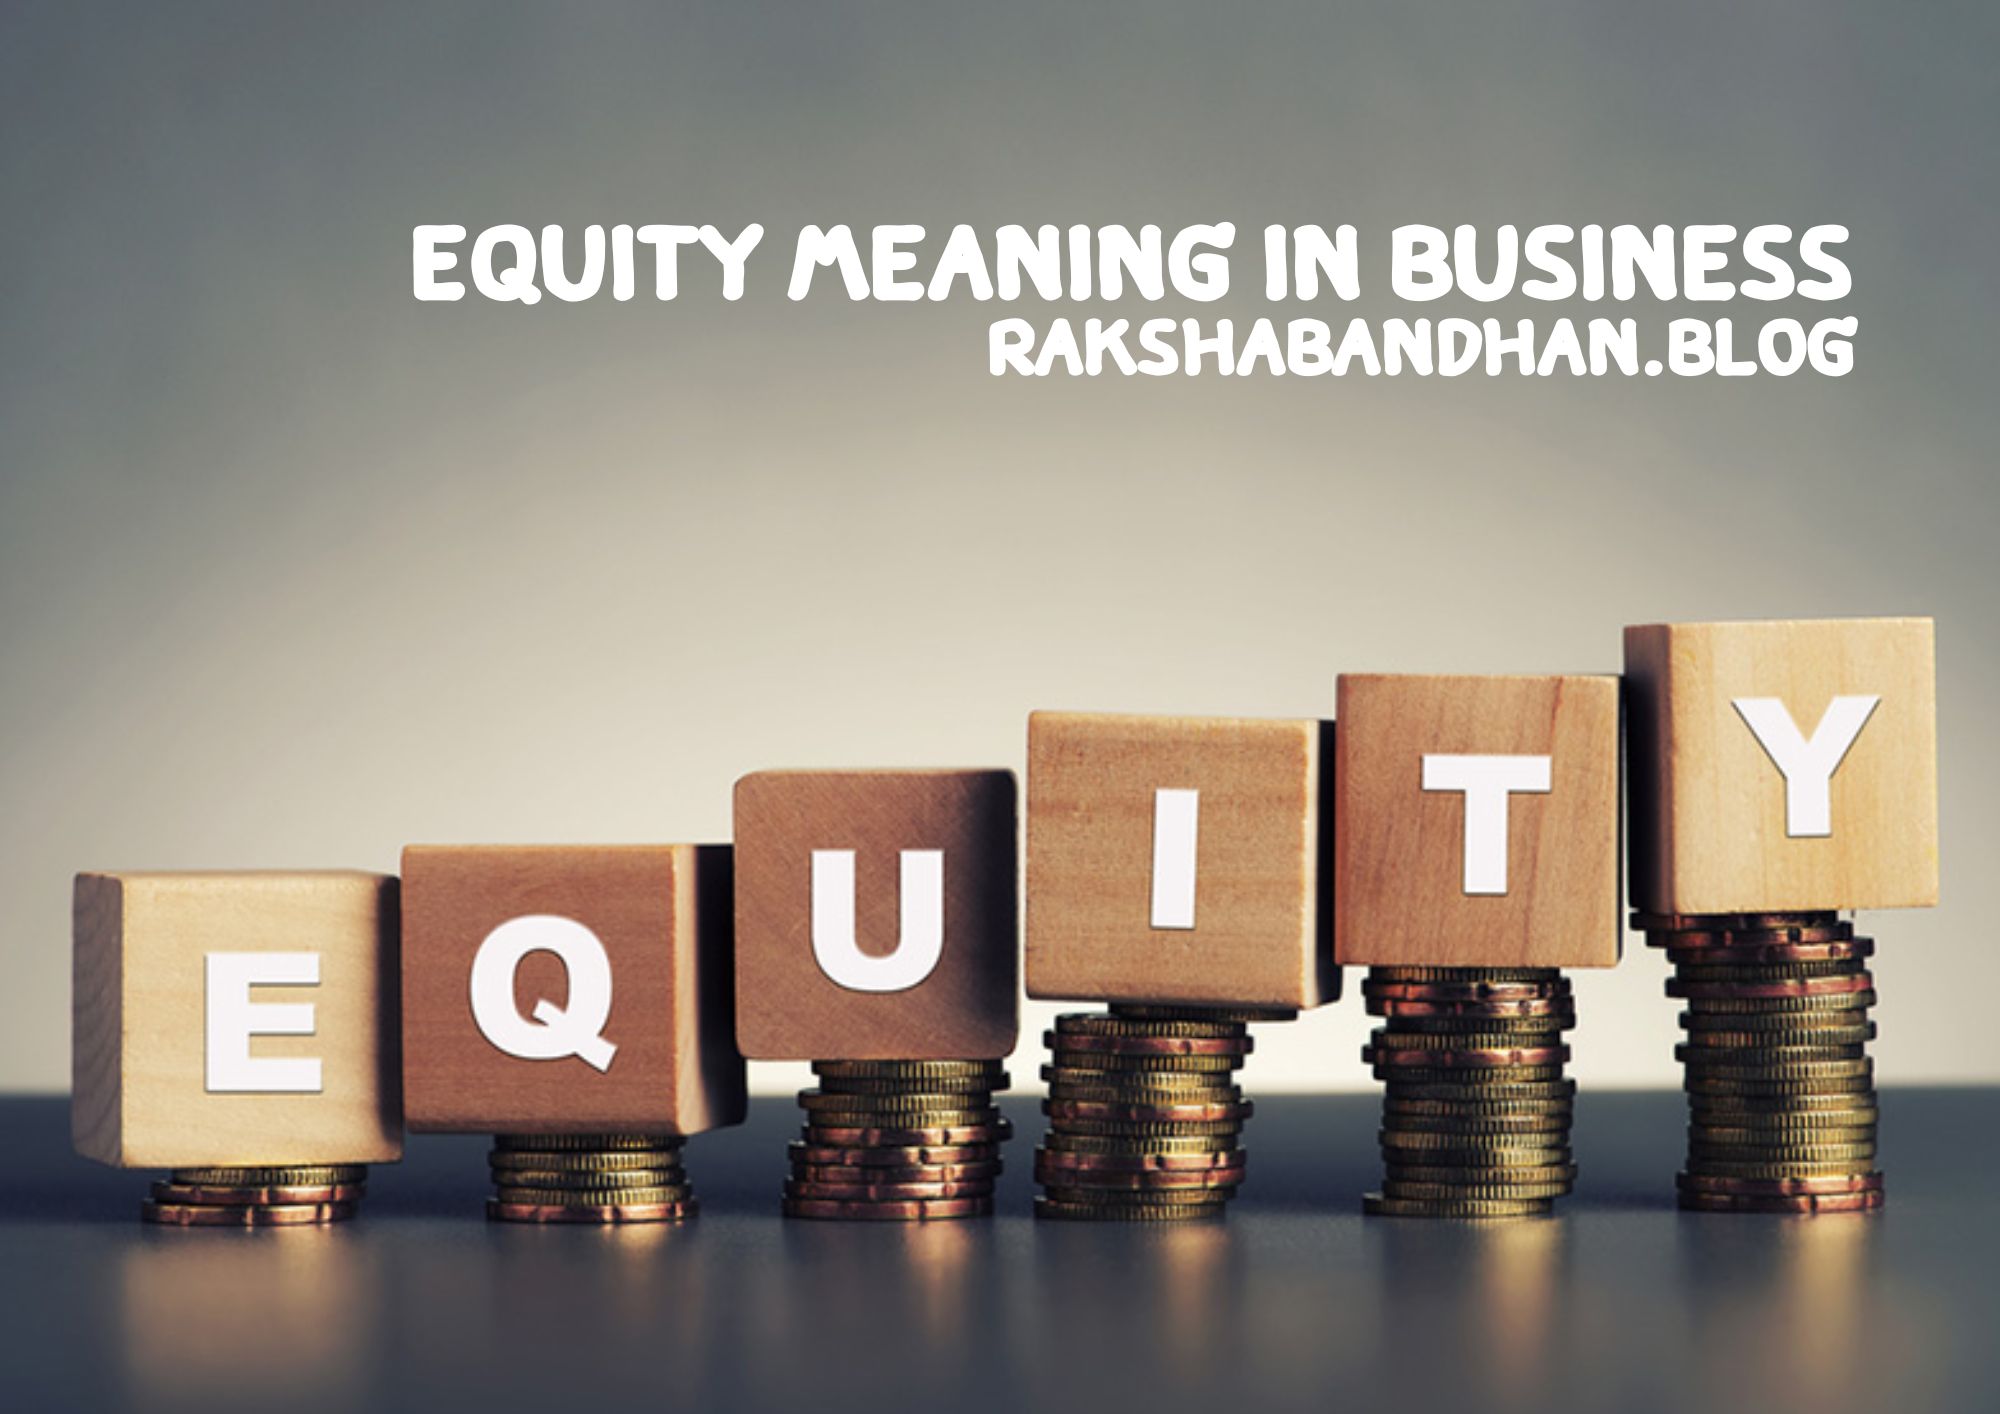 What Is Equity Meaning In Business (Meaning Of Equity In Business)